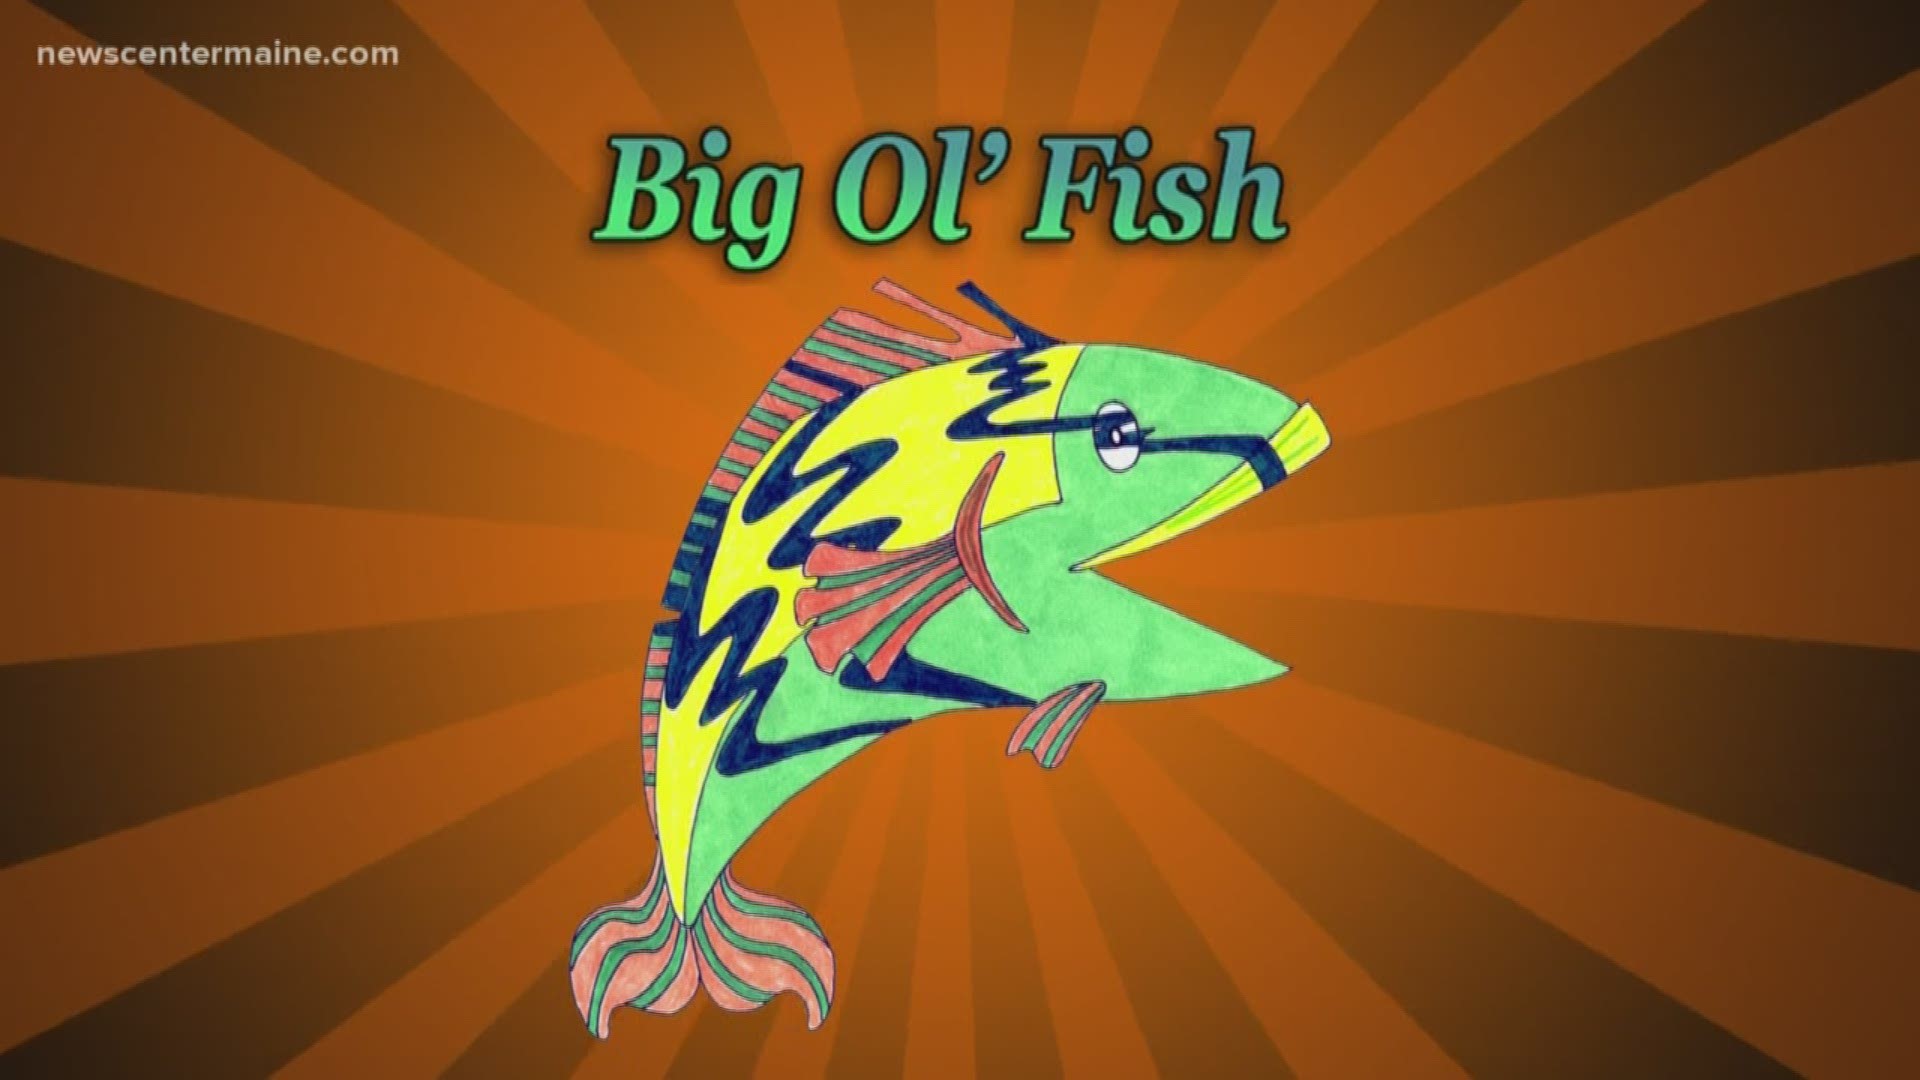 . . . it's just the Big Ol' Fish thing.